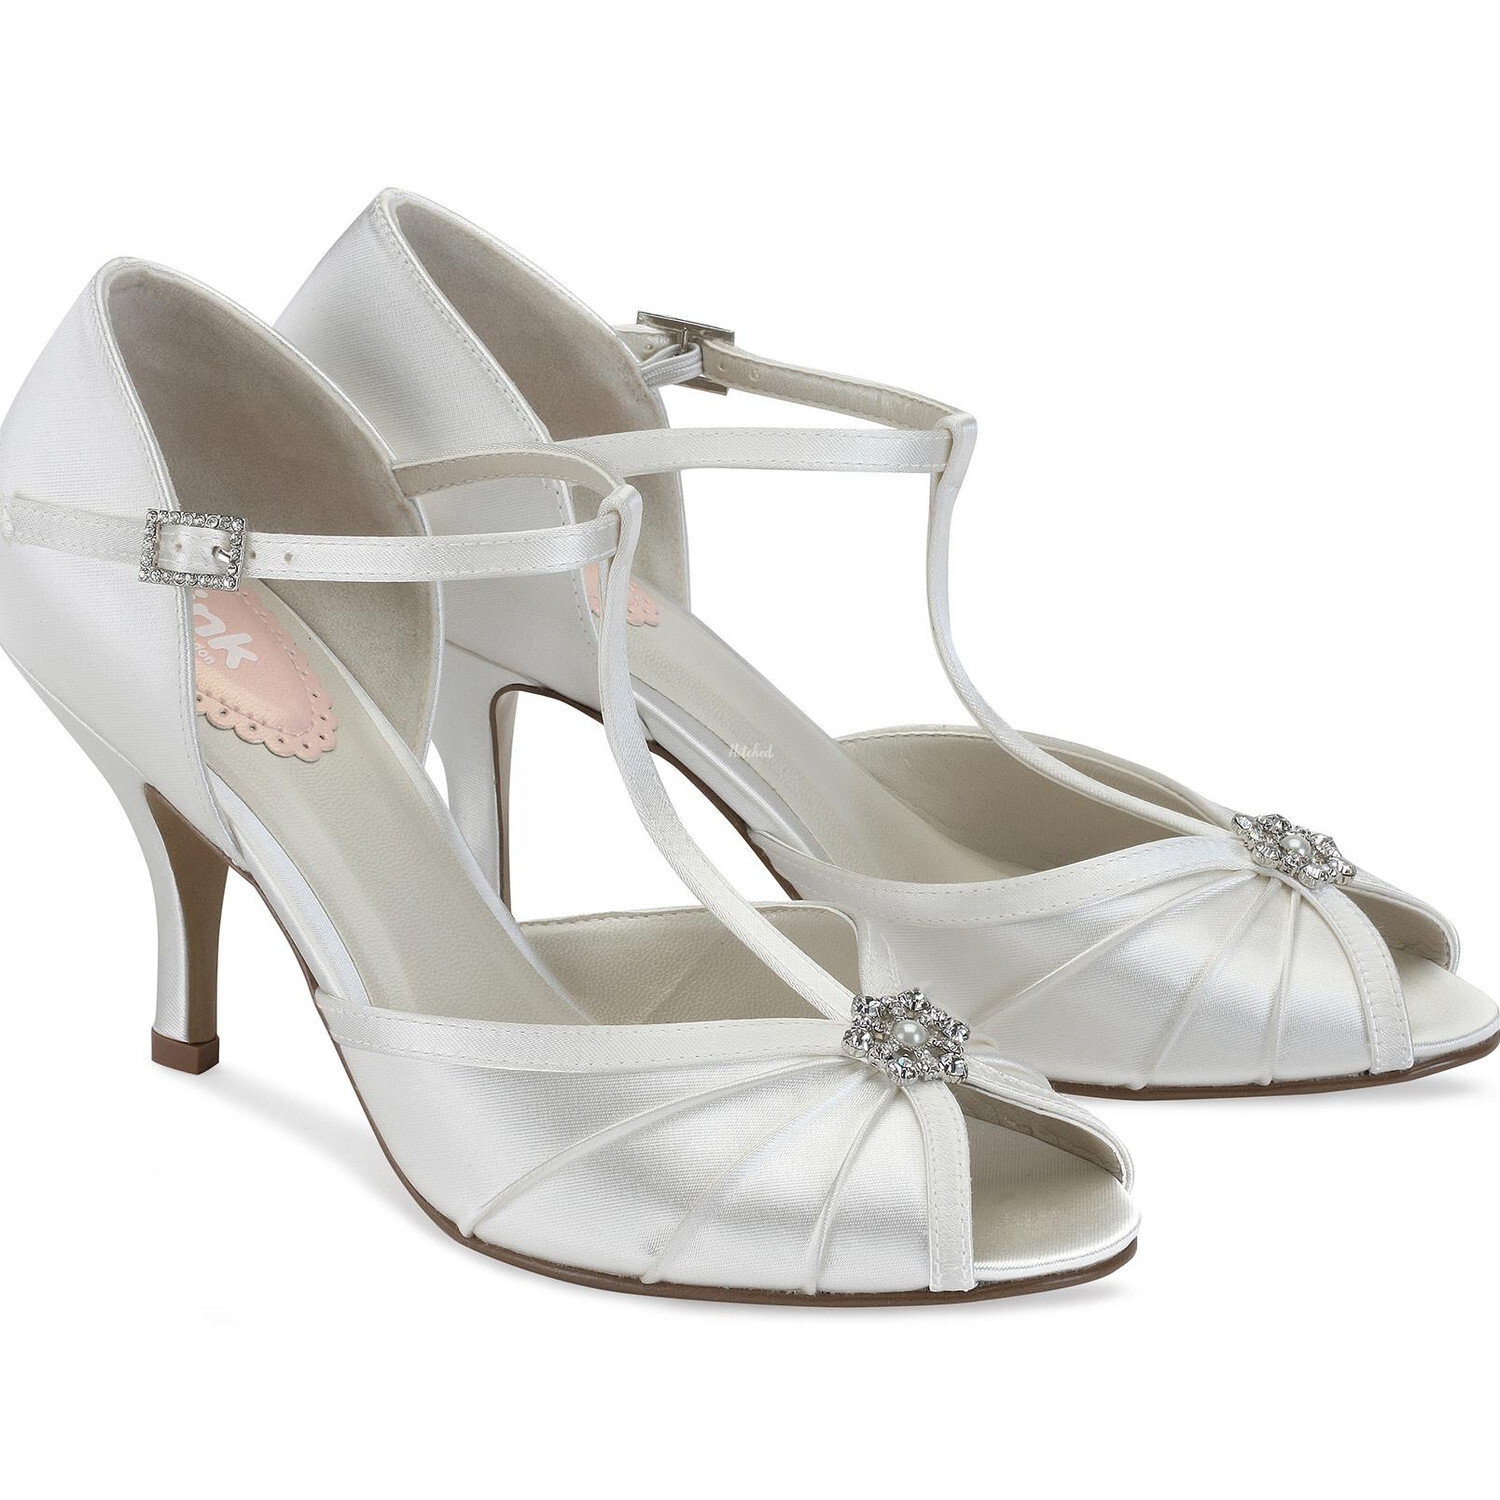 PERFUME Wedding Shoes from Paradox London Pink - hitched.co.uk